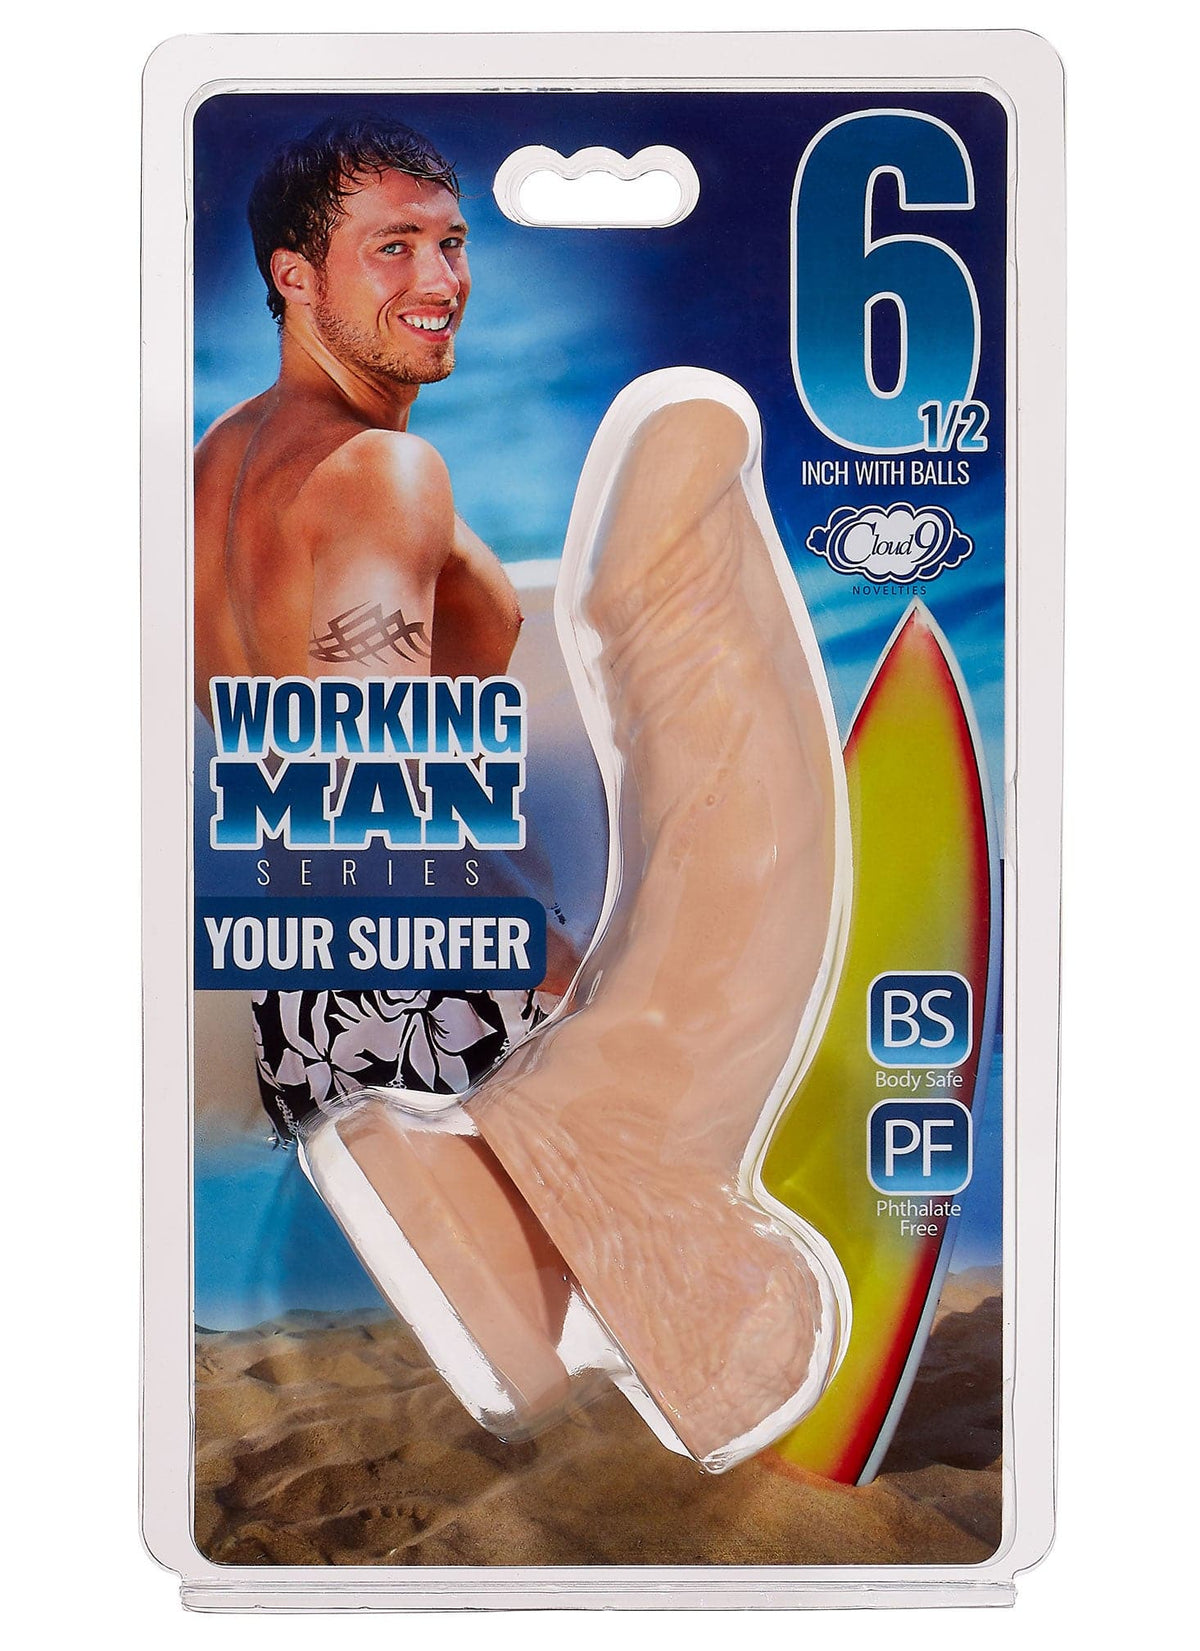 cloud 9 working man 6 5 inch with balls your surfer light